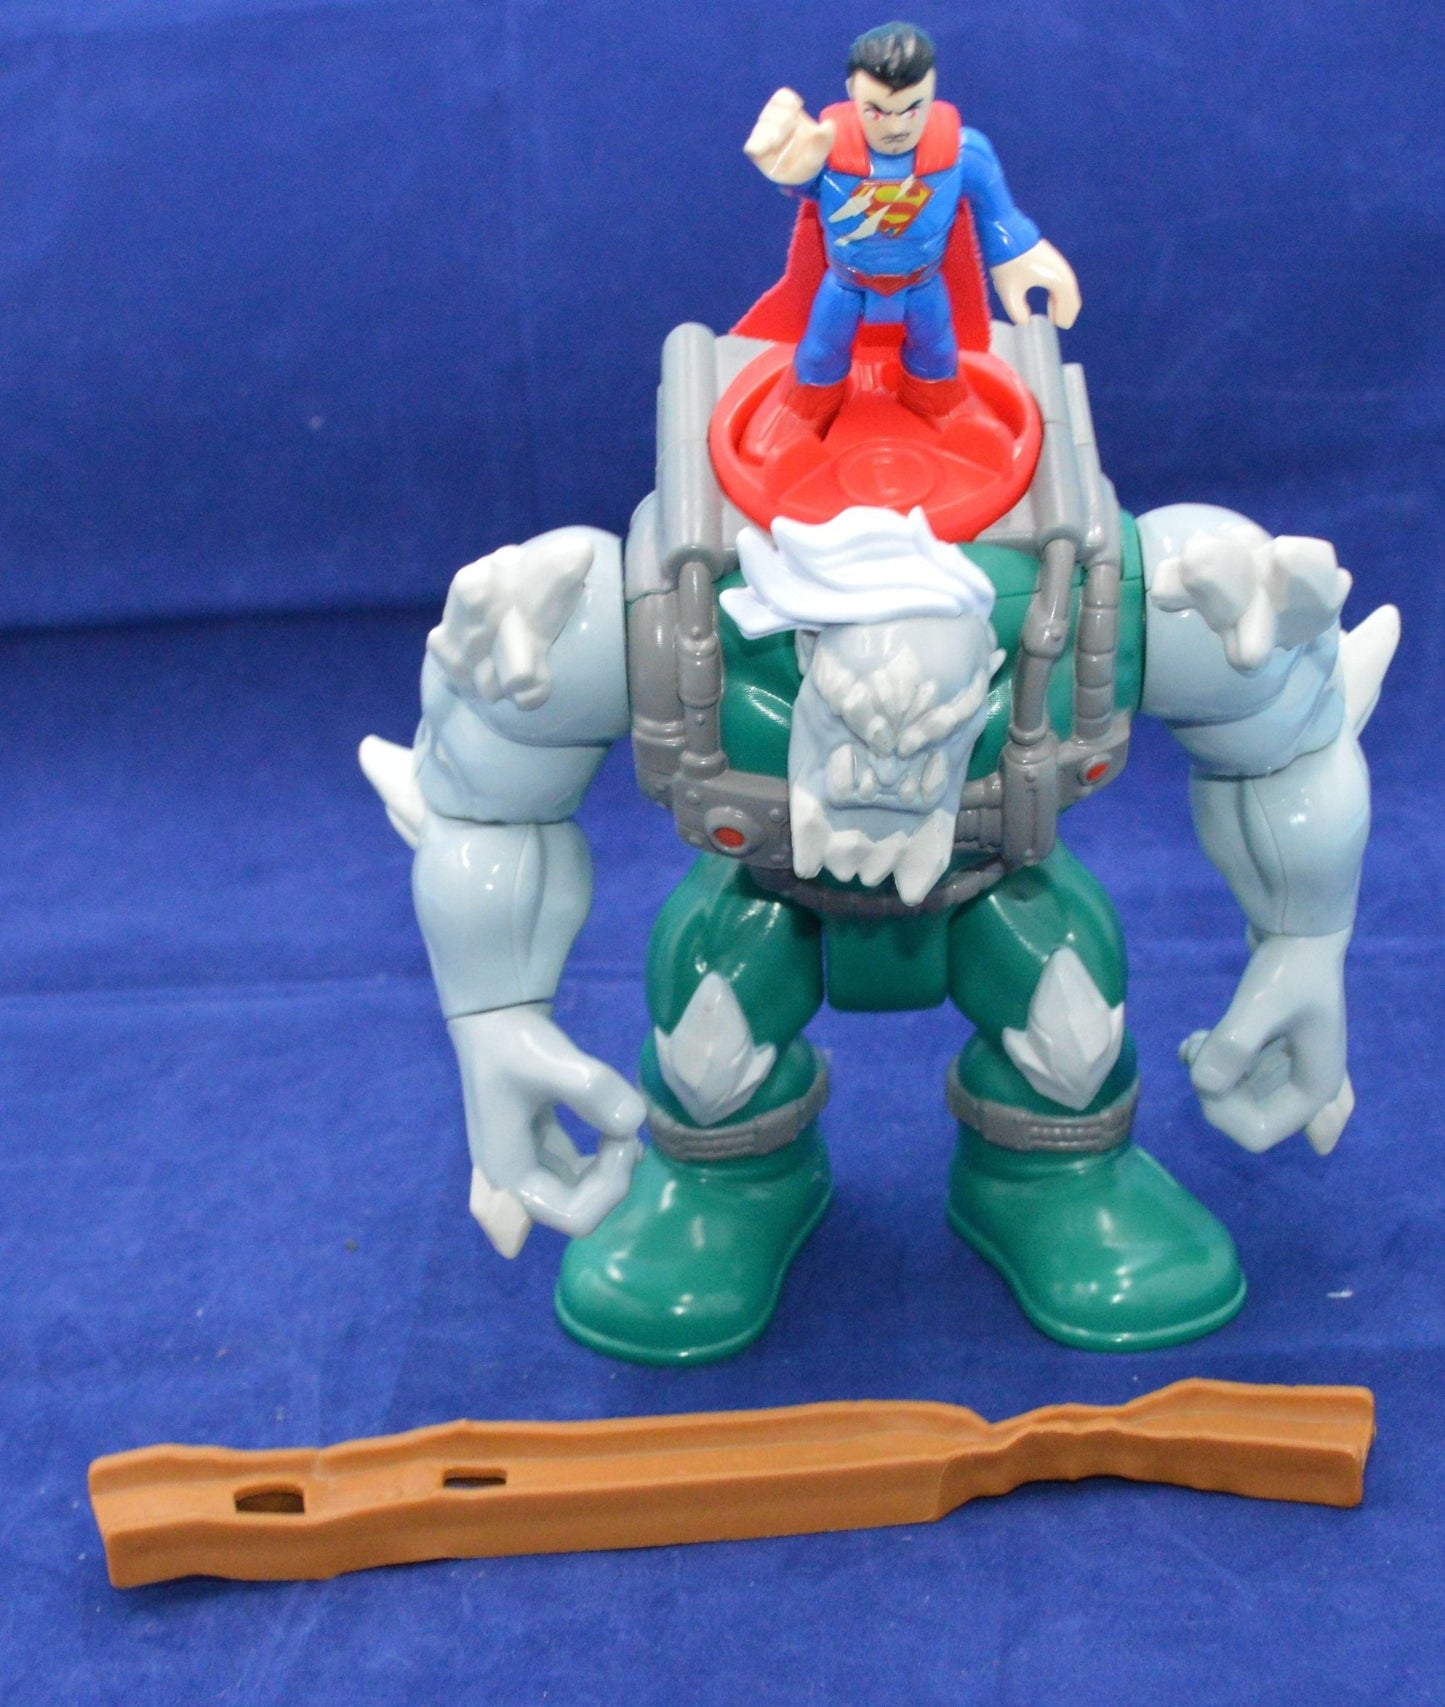 IMAGINEXT DHT67 DOOMSDAY & SUPERMAN FIGURES - TMD167207